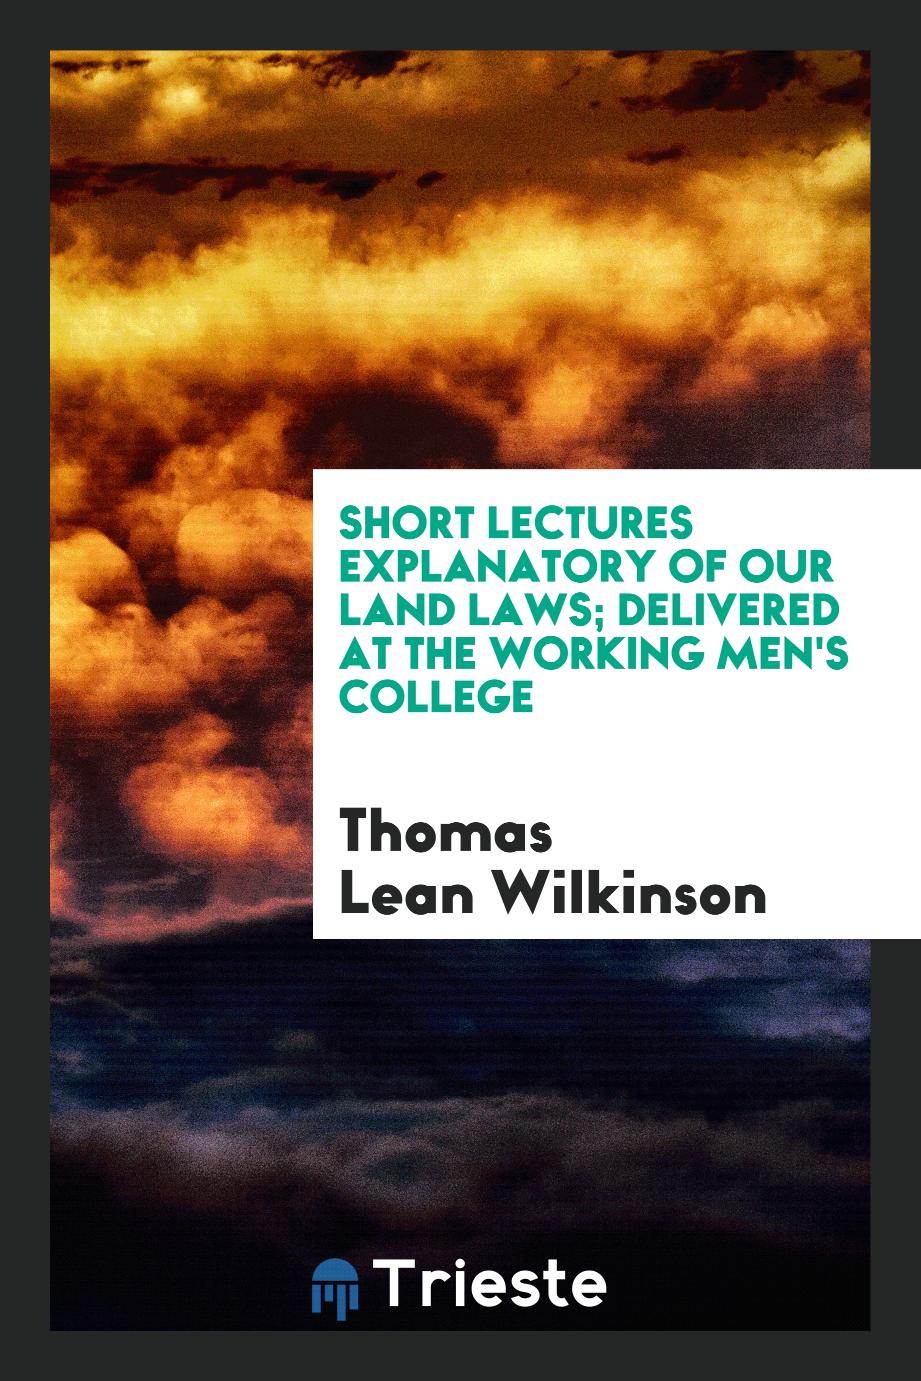 Short lectures explanatory of our land laws; Delivered at the working men's college